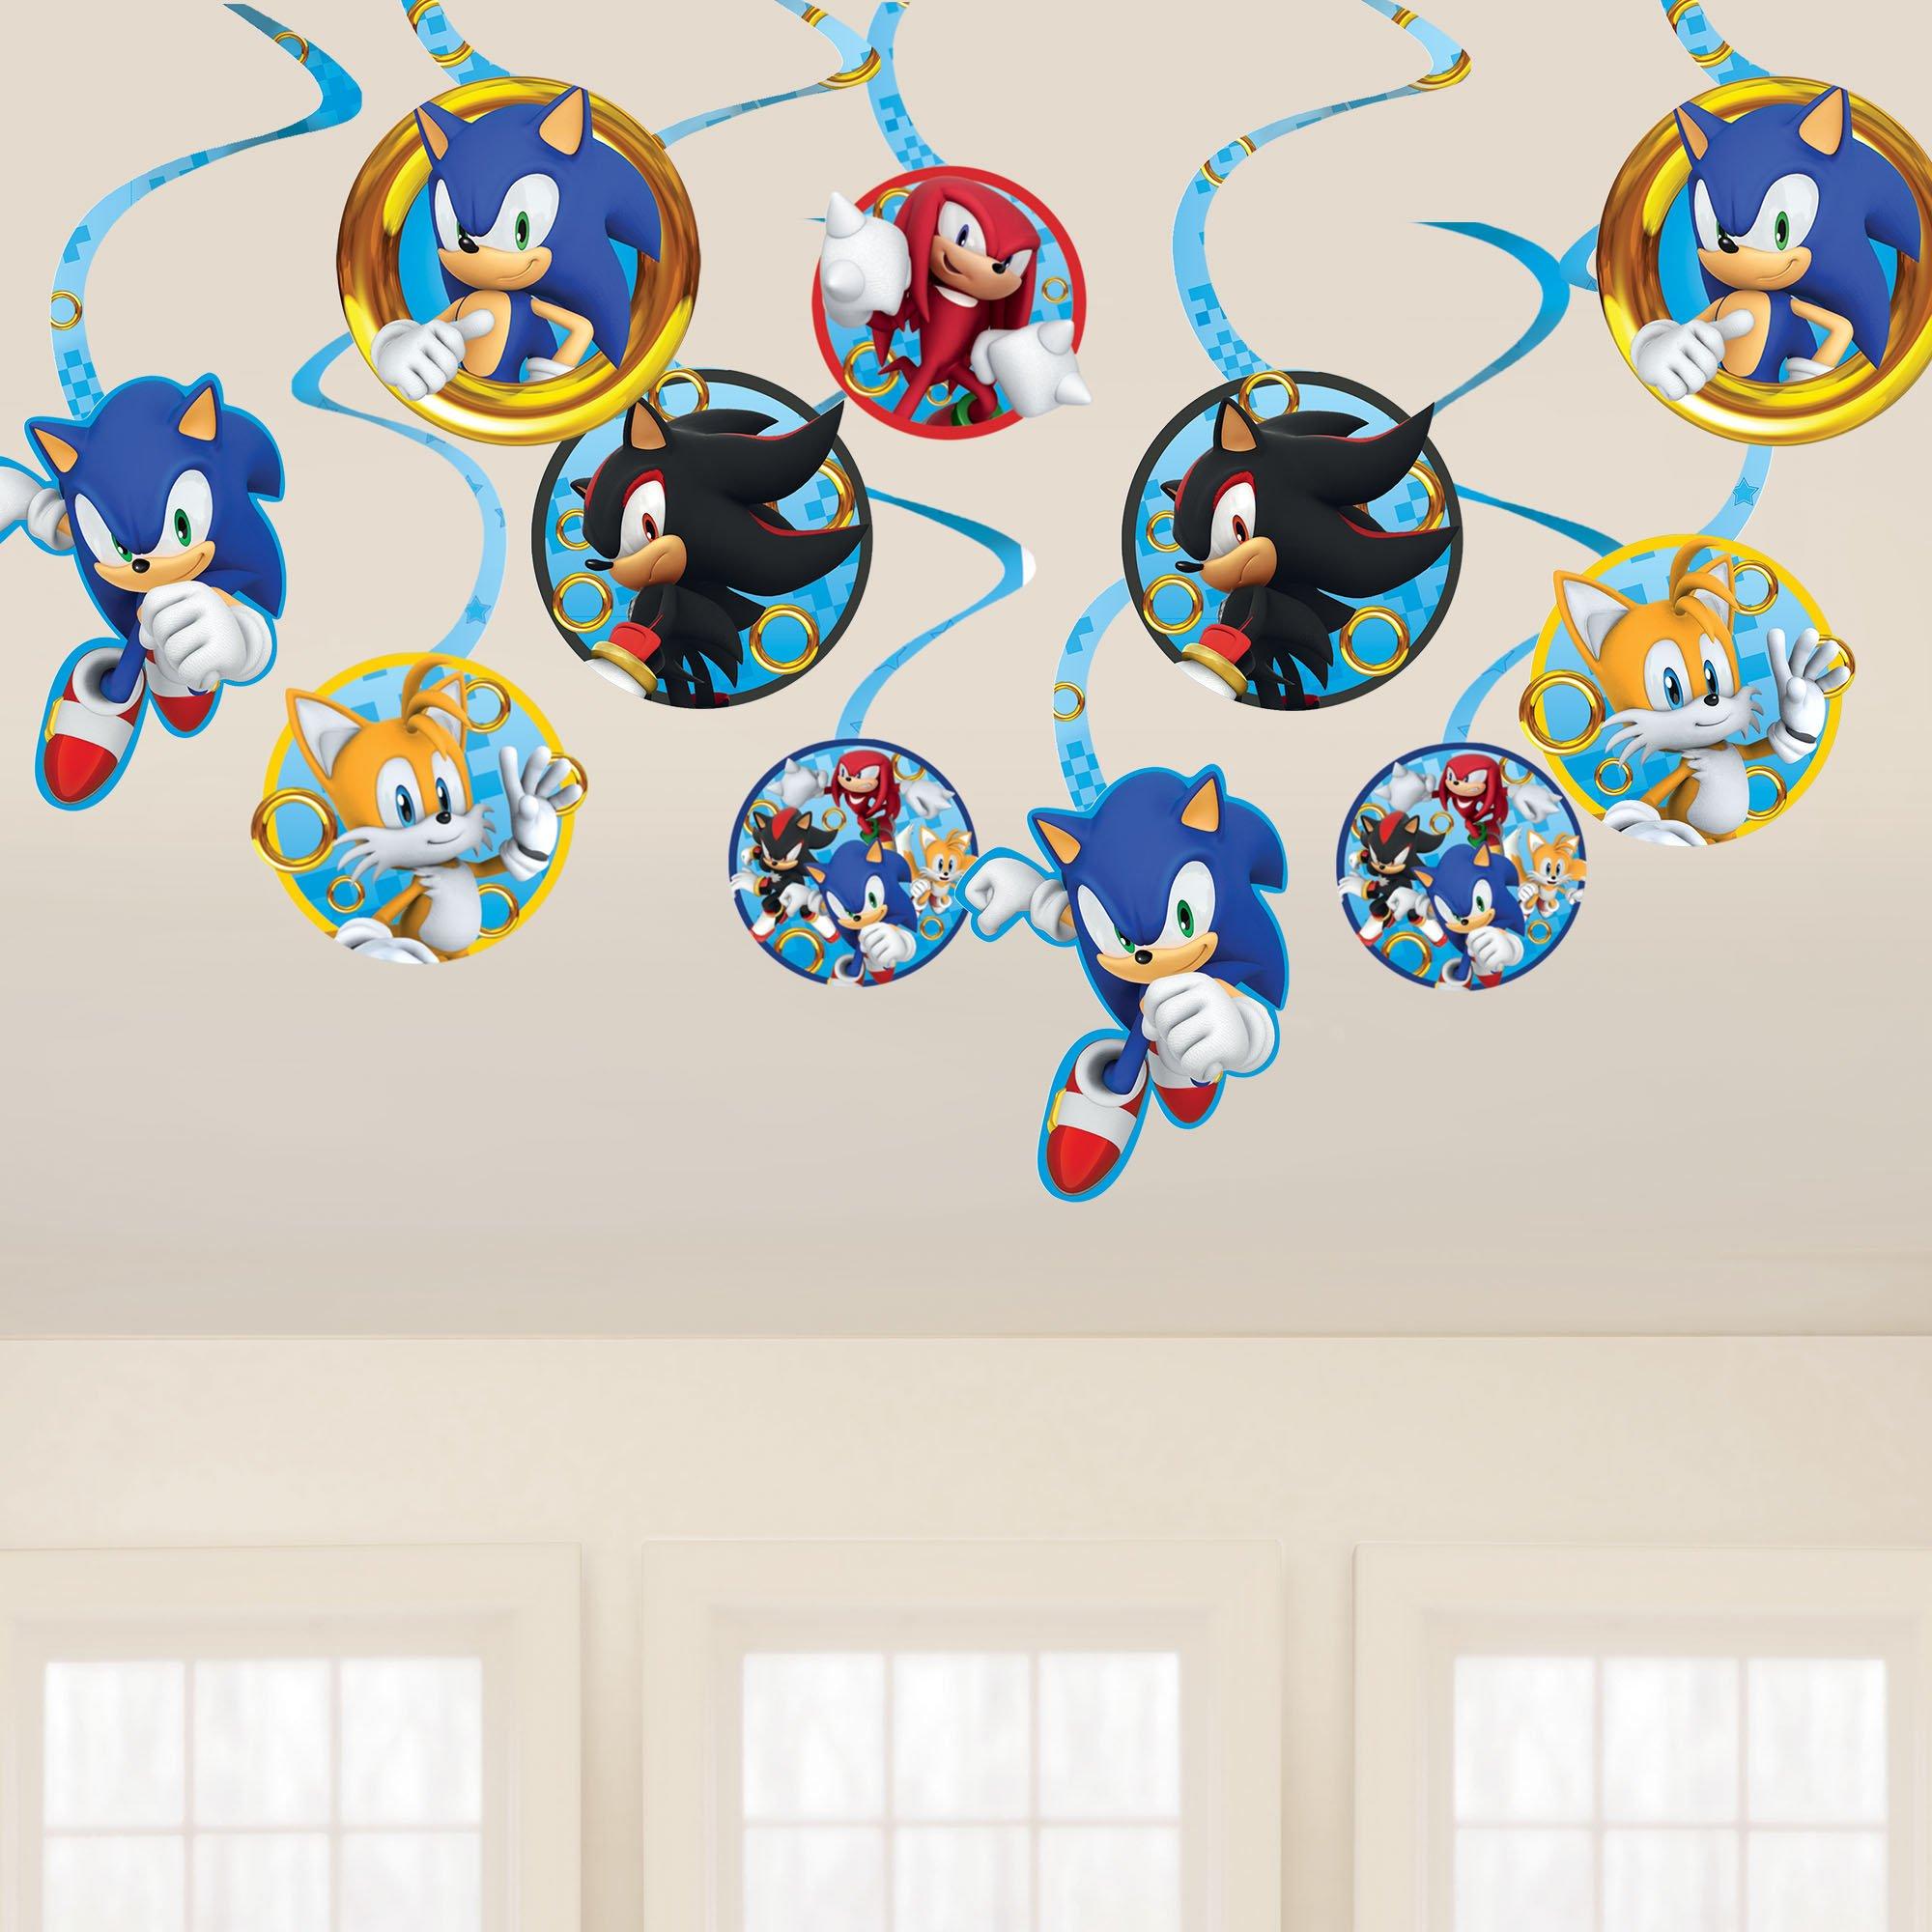 Painting Wall Decoration Sonic Sprite From the Video Game -  Israel